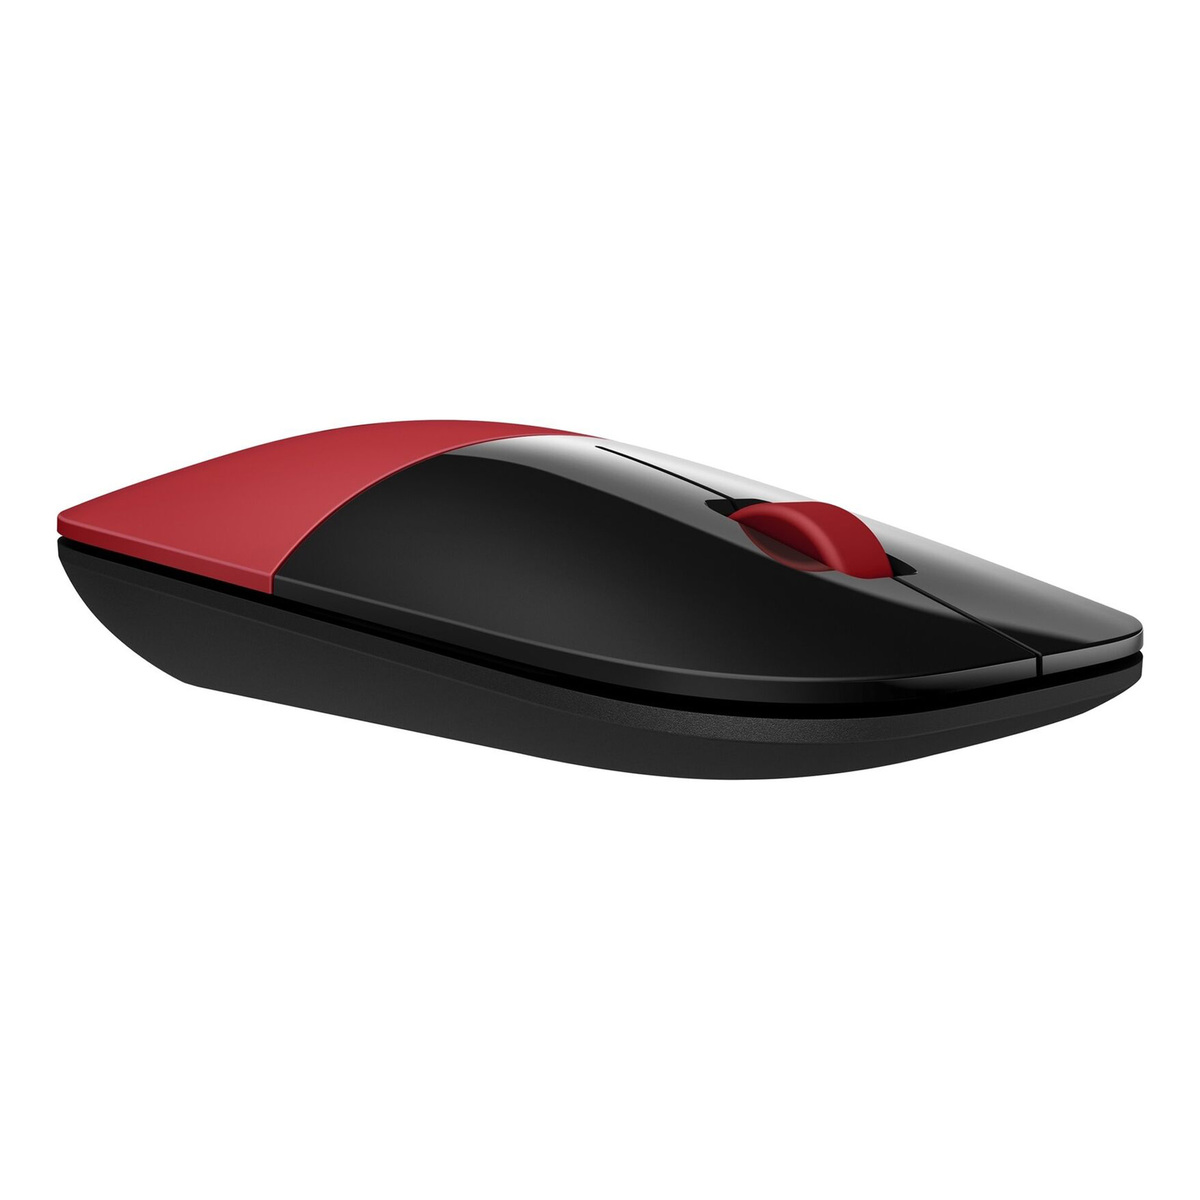 HP Wireless Mouse Z3700 Red